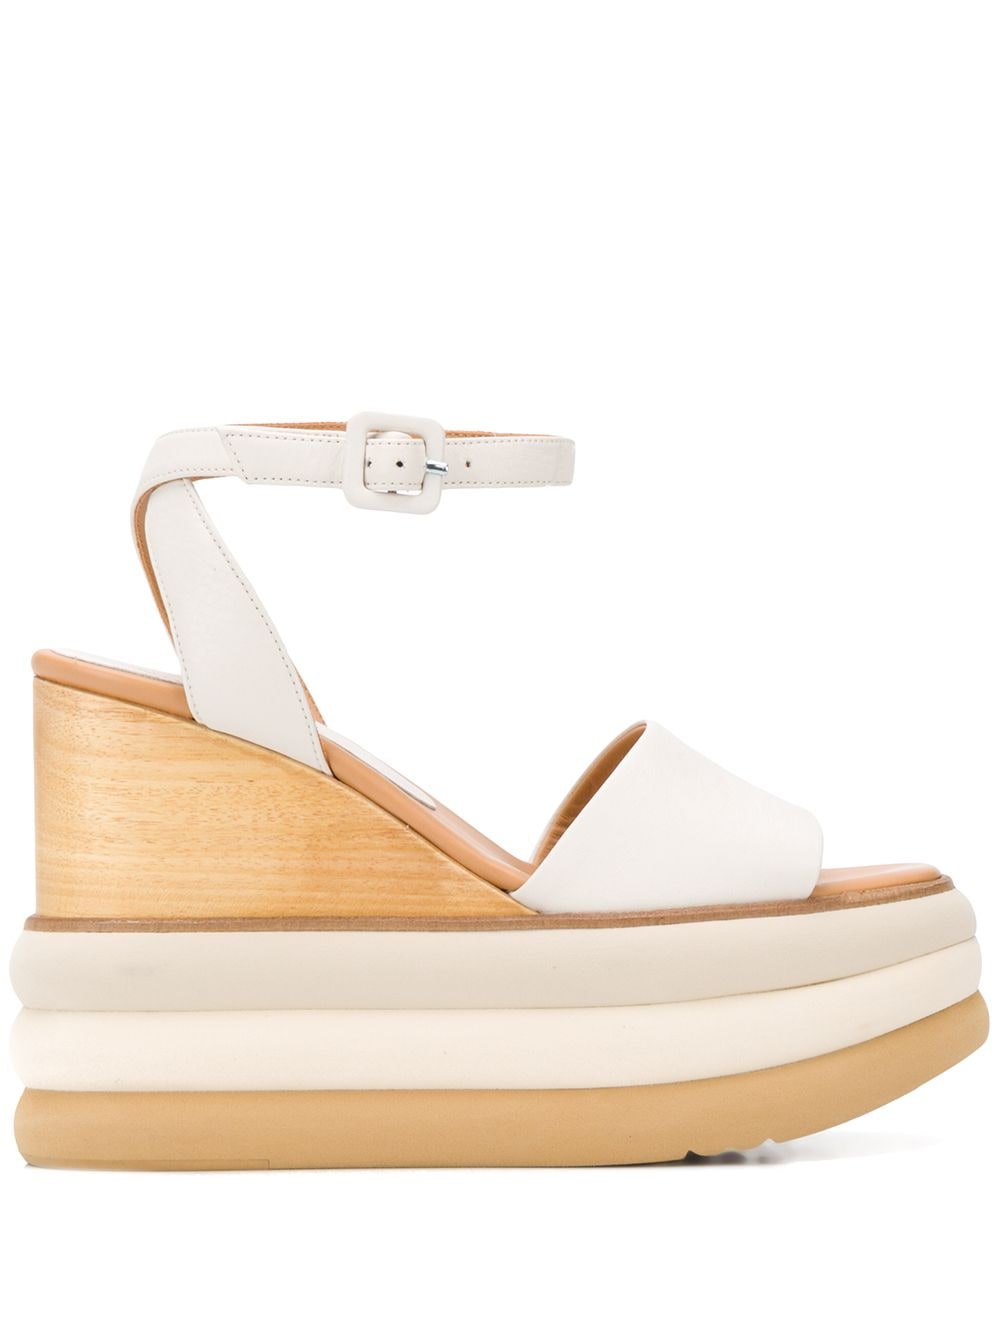 Paloma Barceló Rosie Wedge Sandals In White